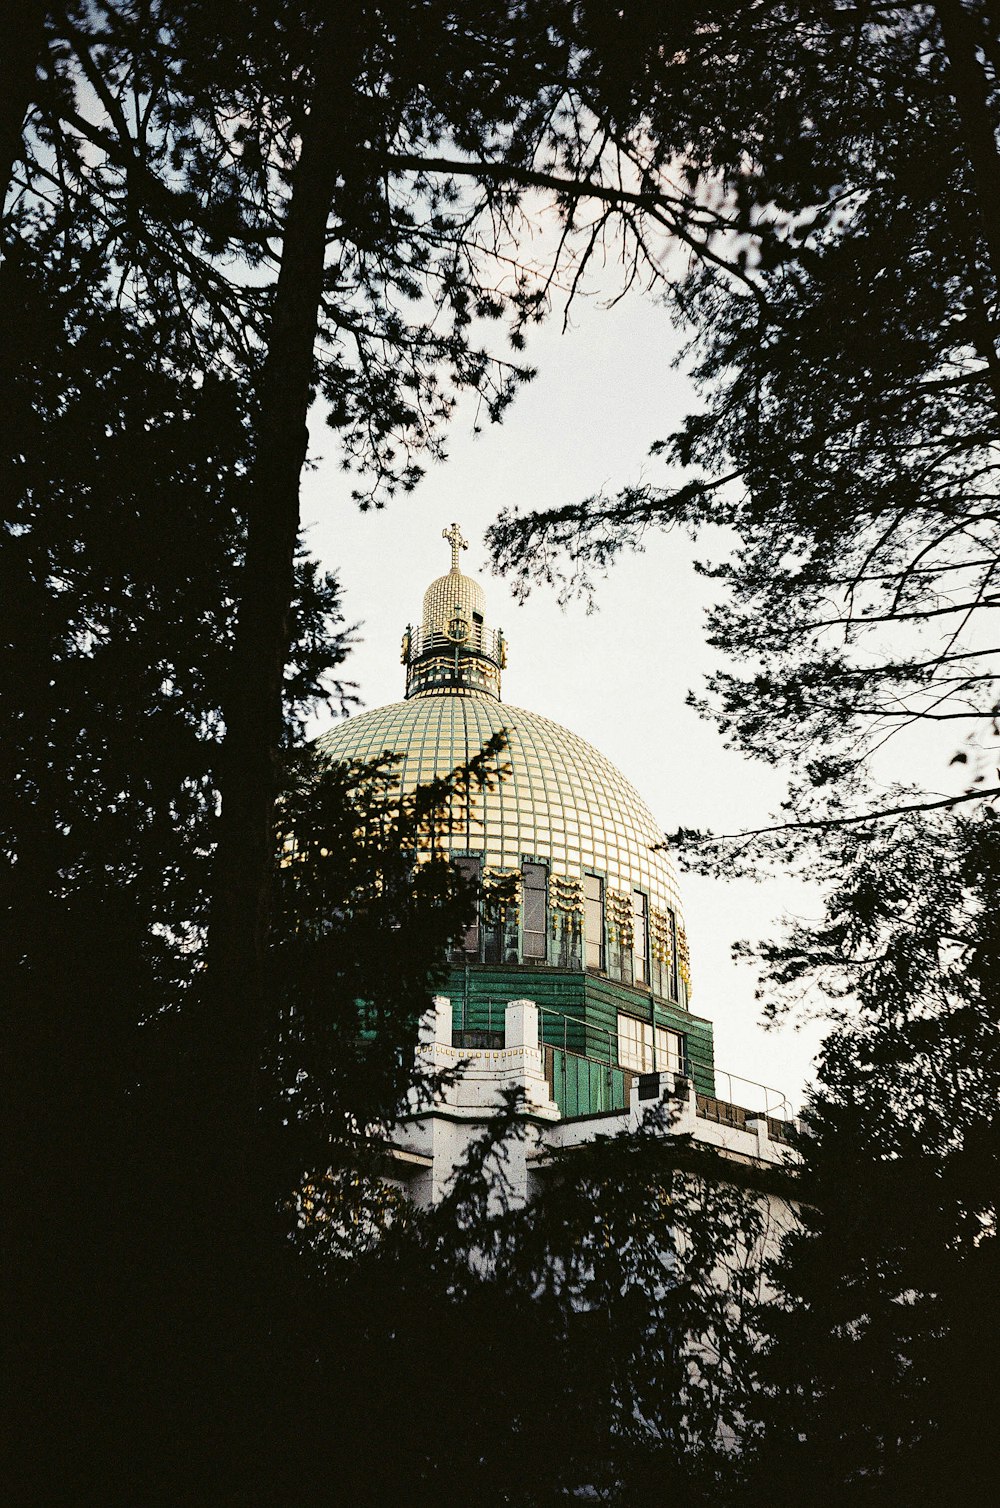 the dome of a building is seen through the trees